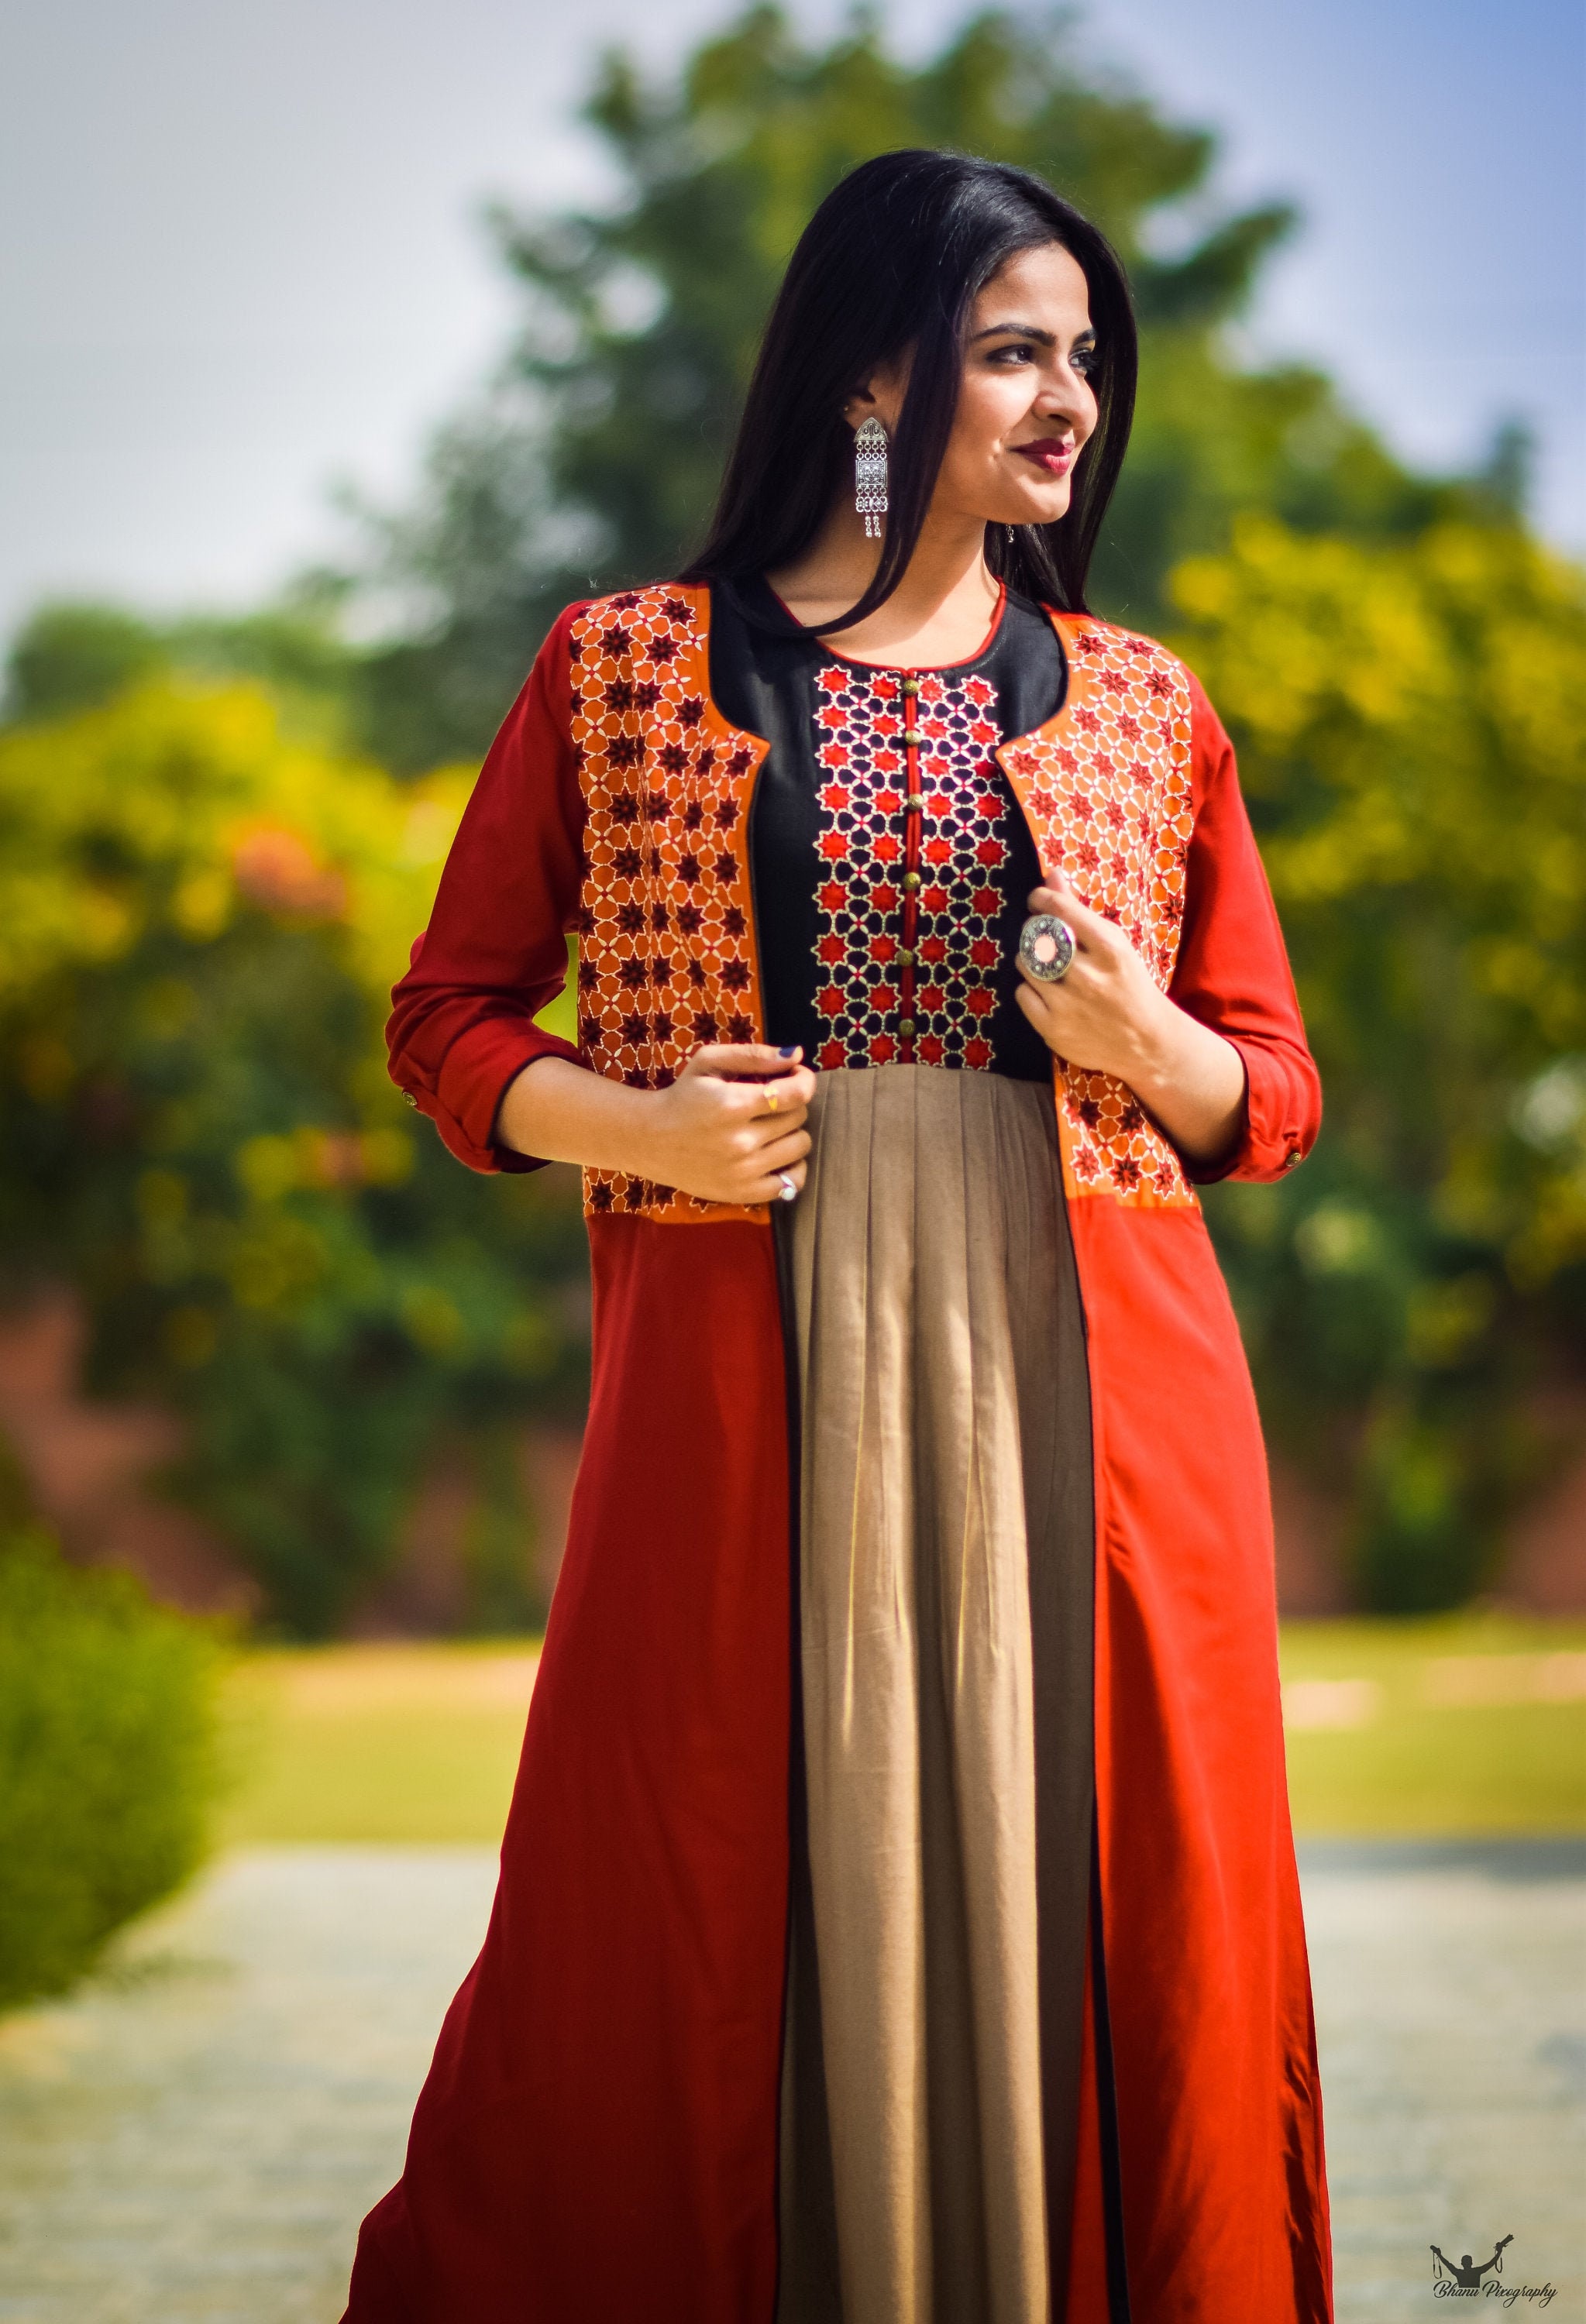 Embroidered Rayon Kurti with Attached Shrug | D.NO.4008 | Cilory.com-hkpdtq2012.edu.vn